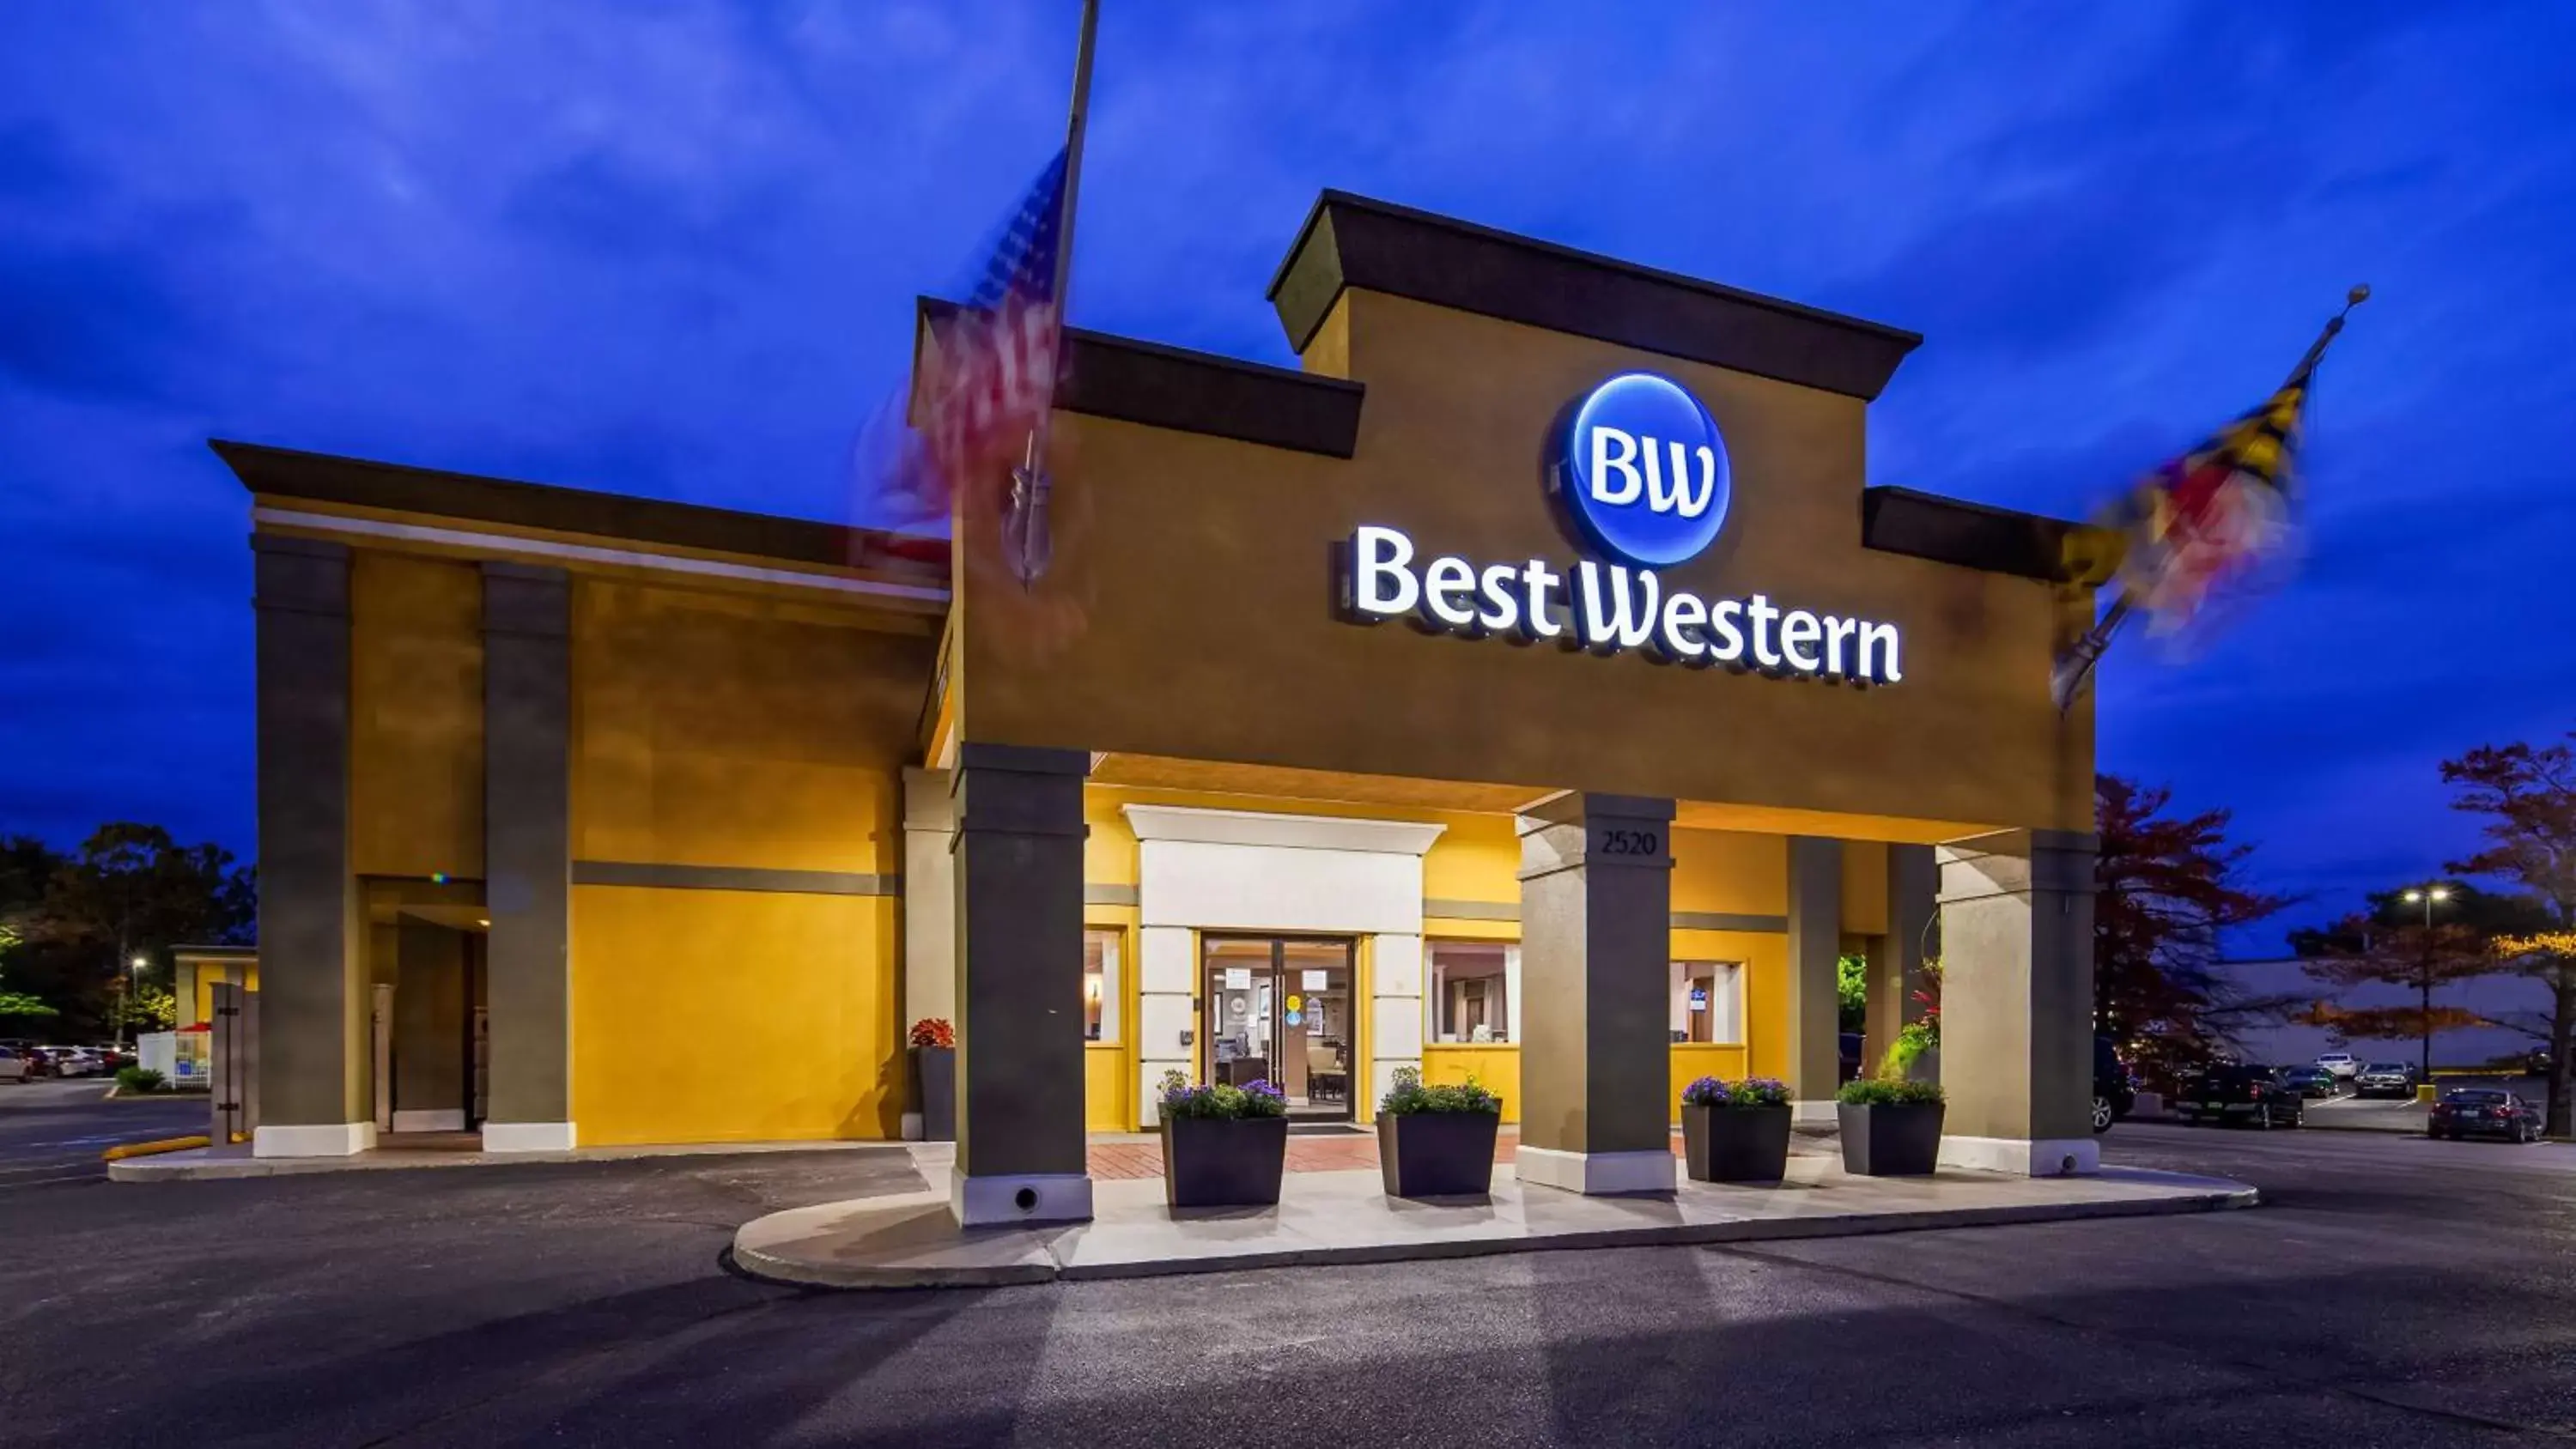 Property building in Best Western Annapolis